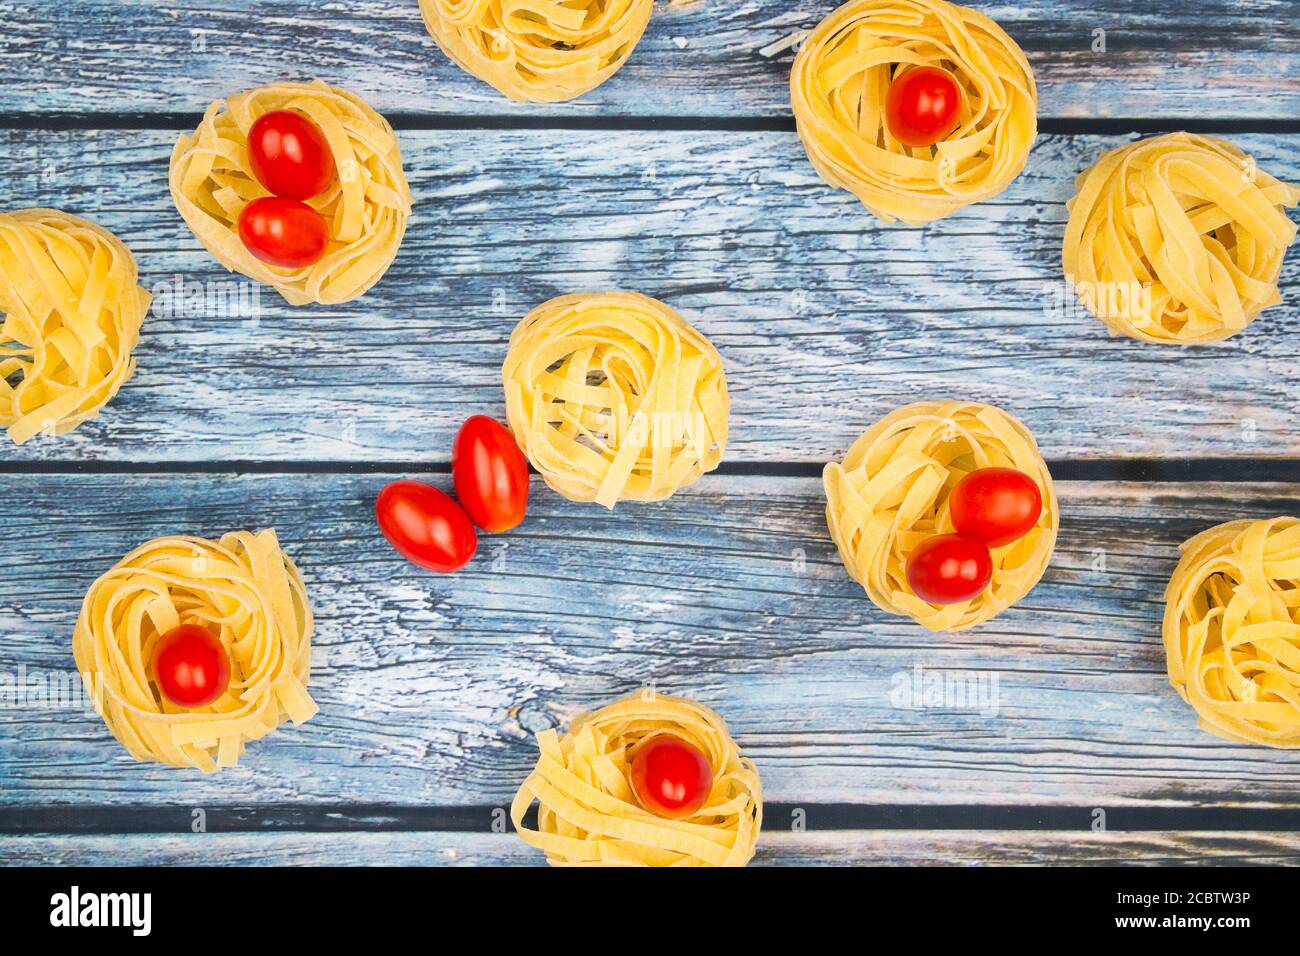 Close up of nests of tagliatelle noodles with egg-shaped mini roma tomatoes on a rustic wooden table wit burlap, Stock Photo